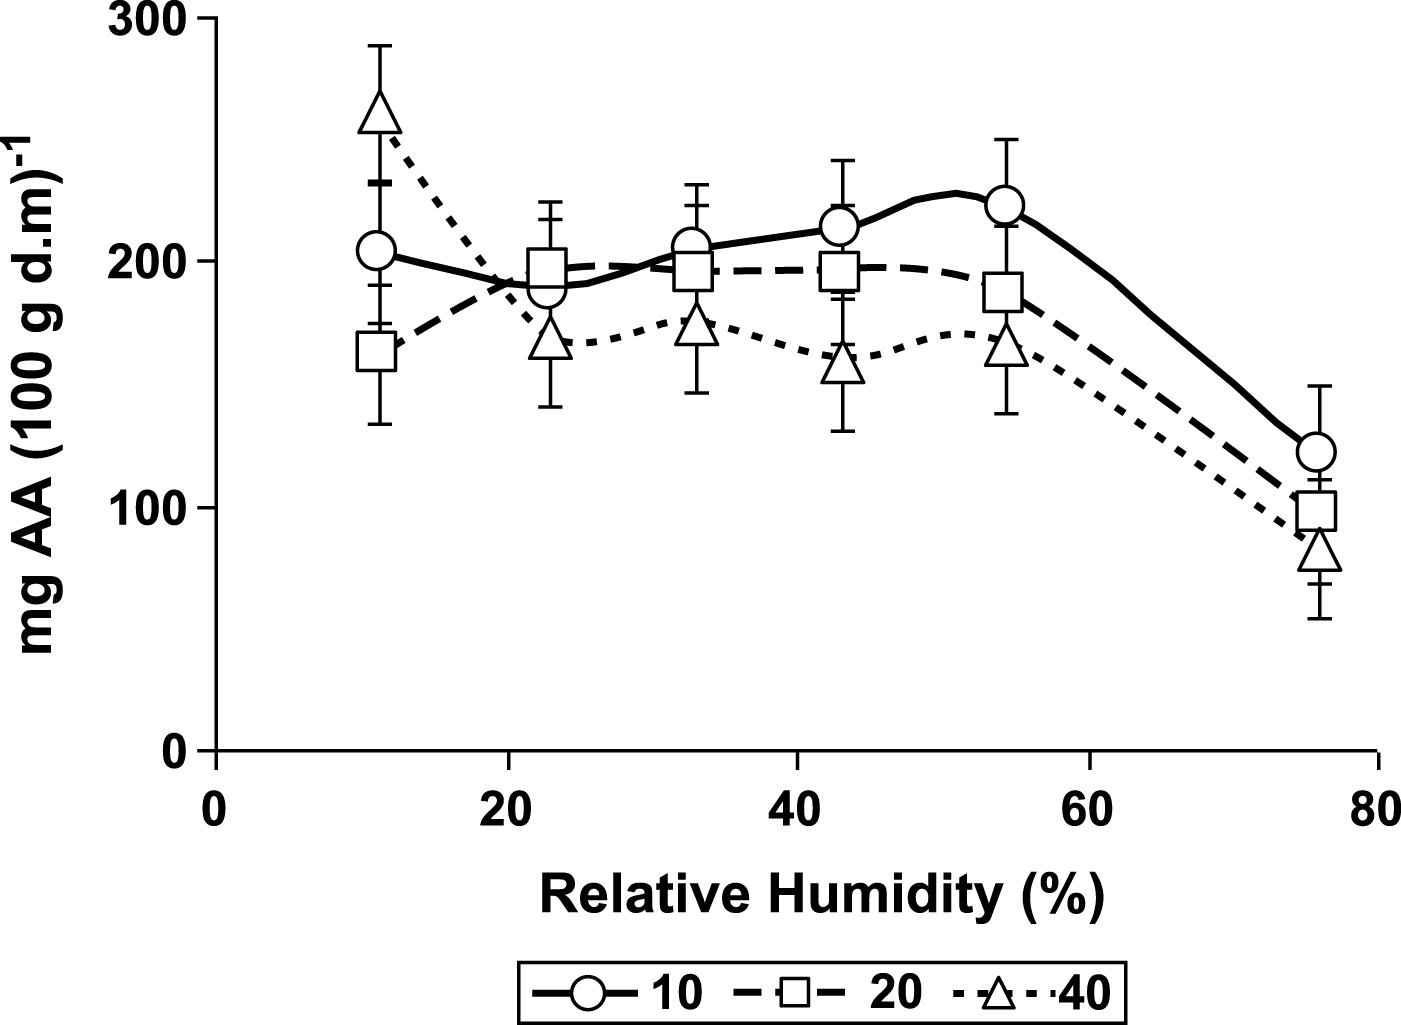 Ascorbic acid (AA) content changes with relative humidity (%) and temperature°C.